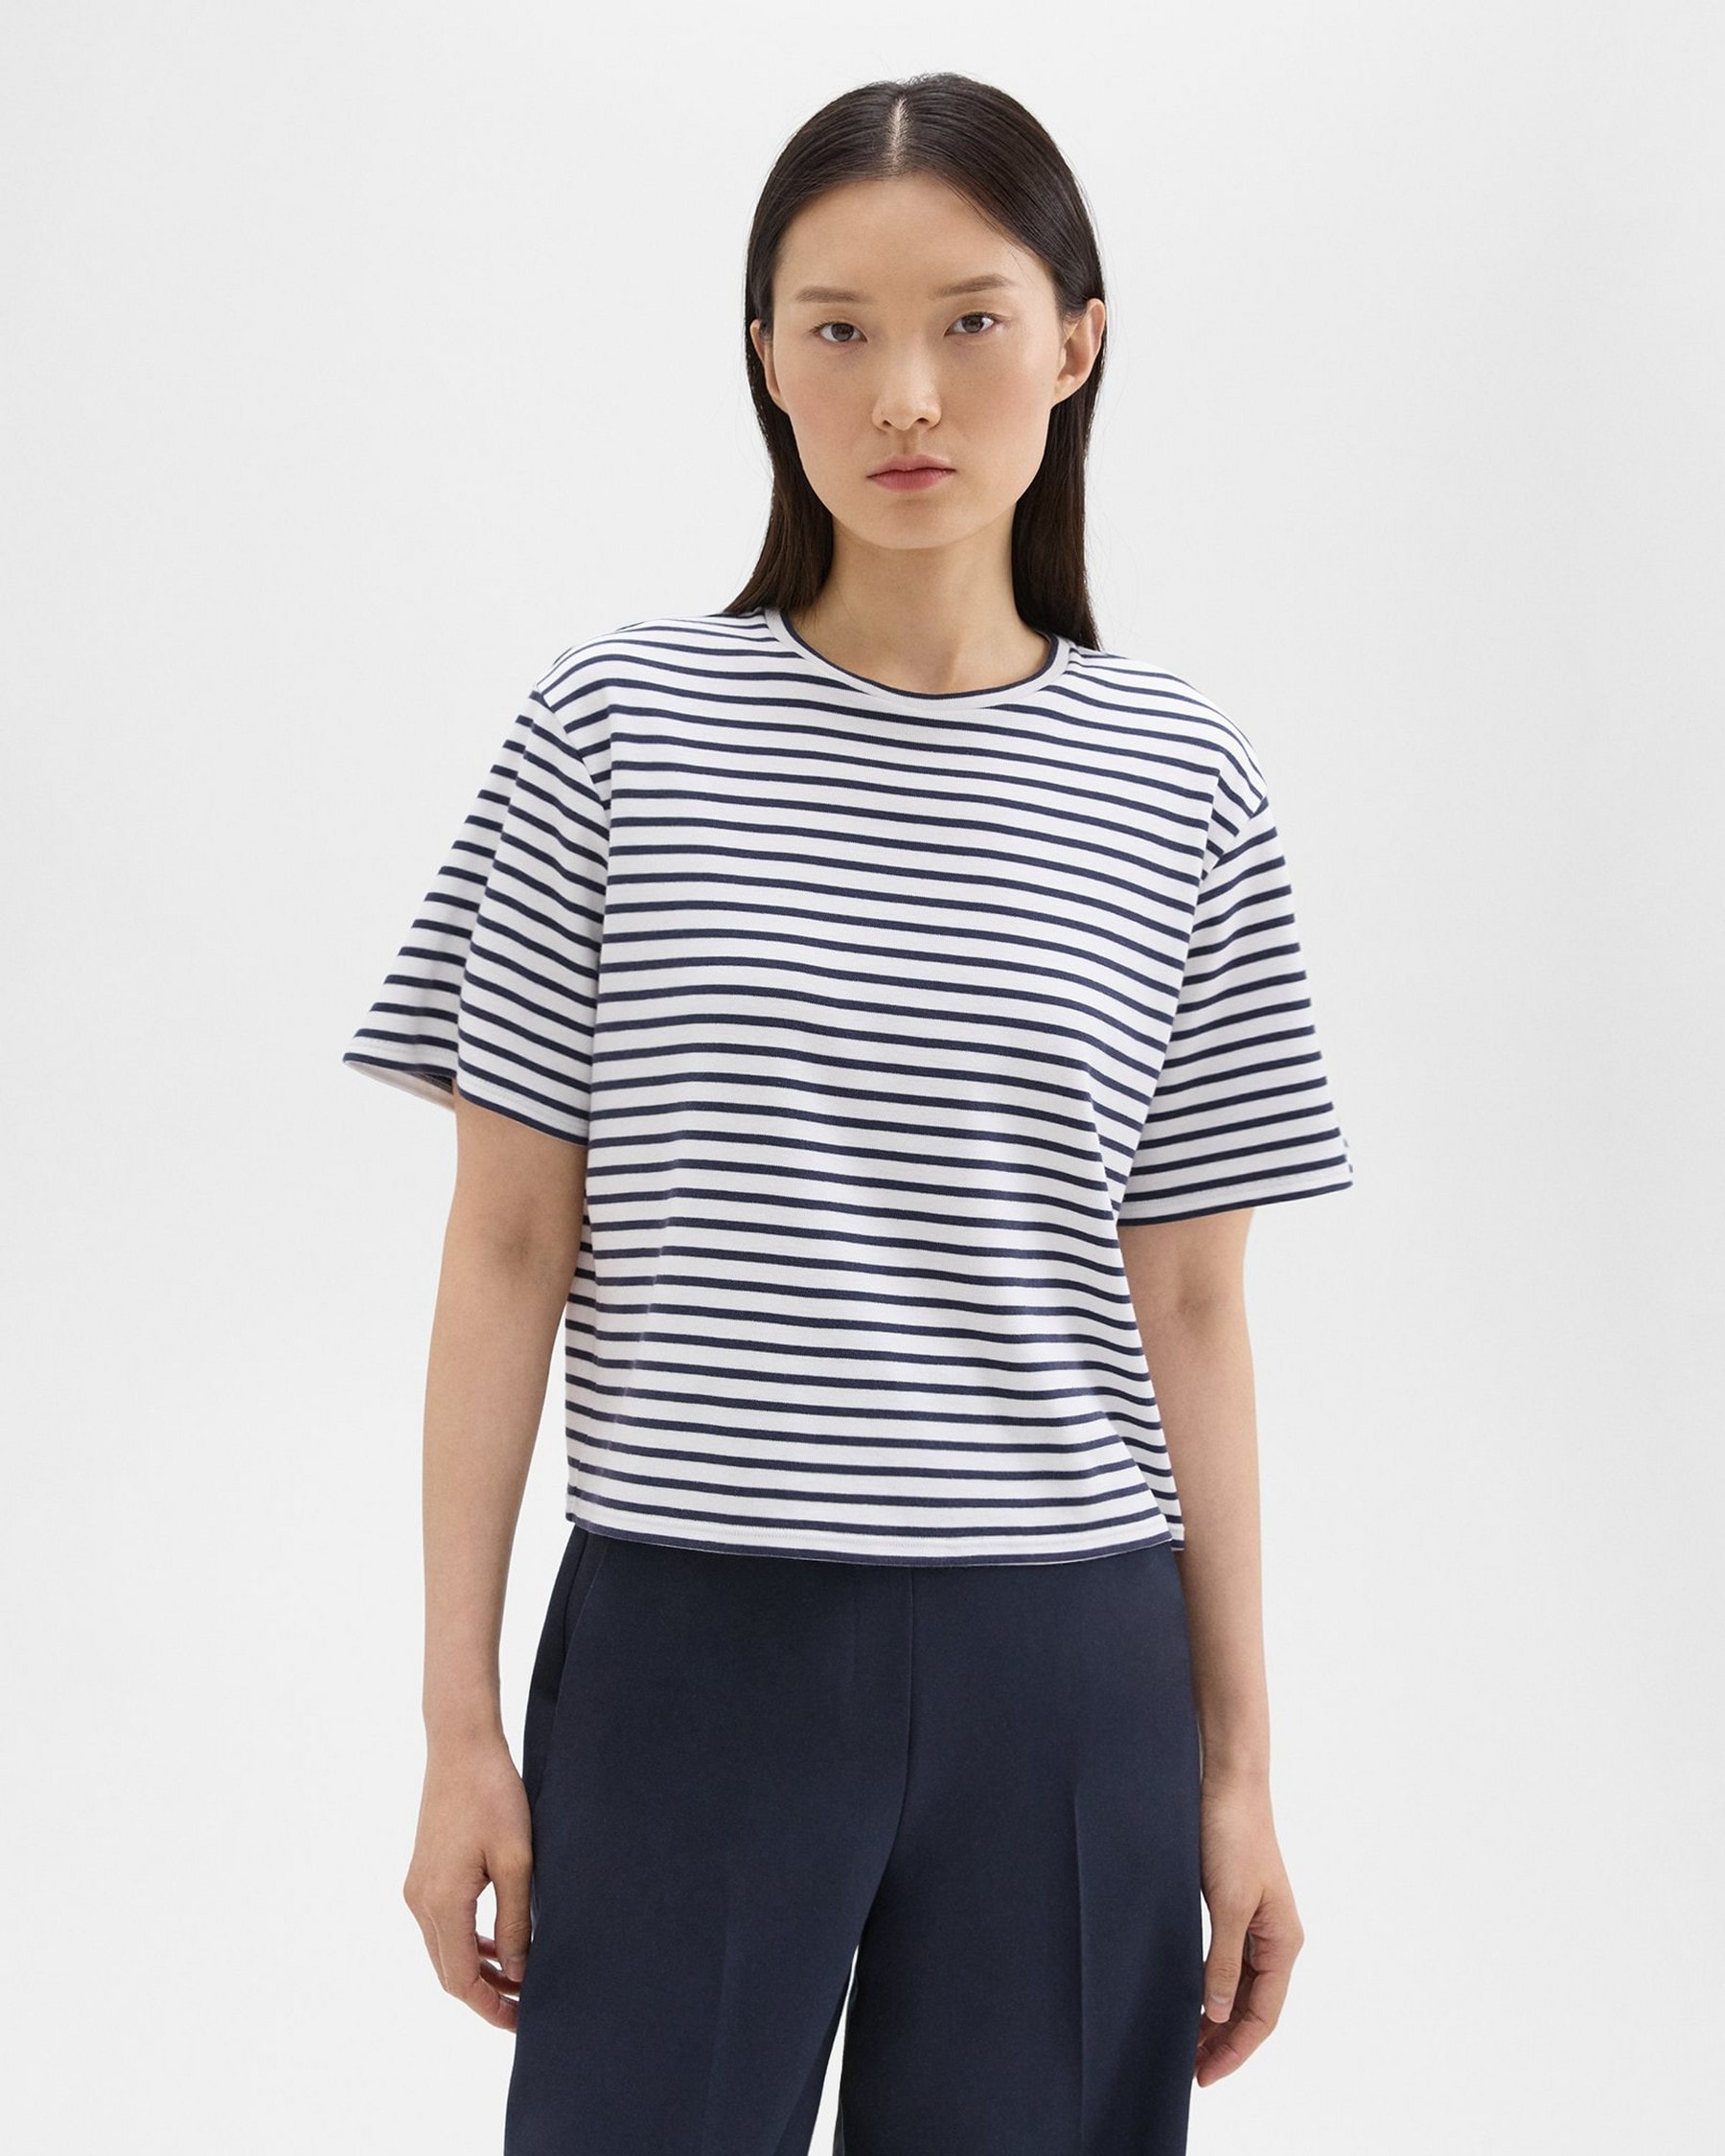 Boxy Tee in Striped Cotton Jersey